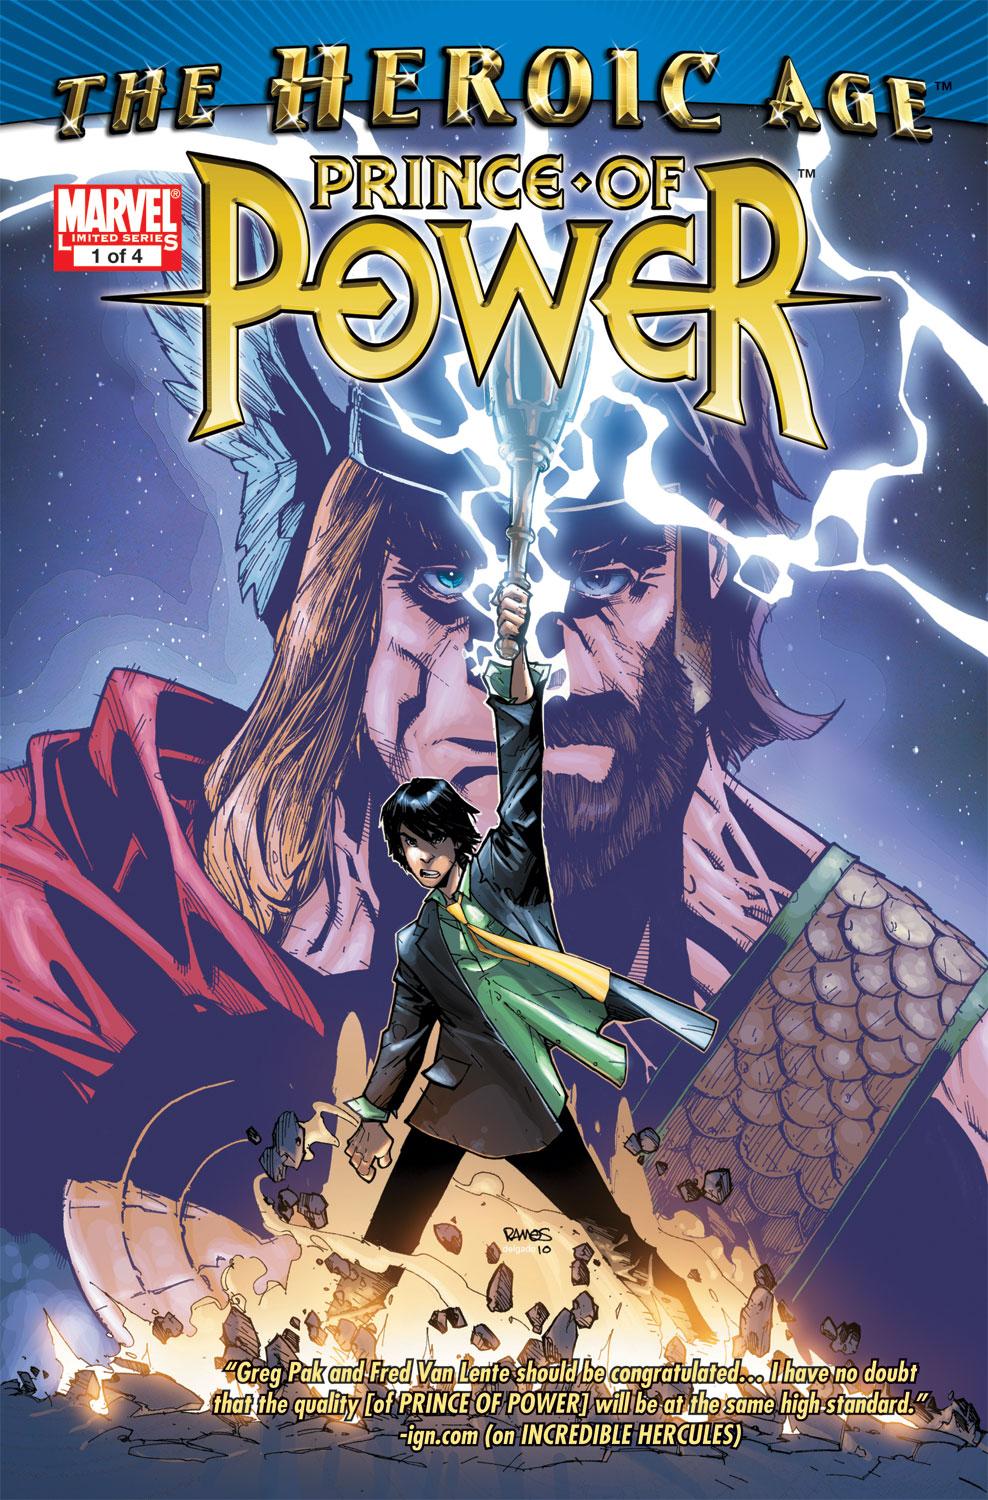 Heroic Age: Prince of Power (2010) #1